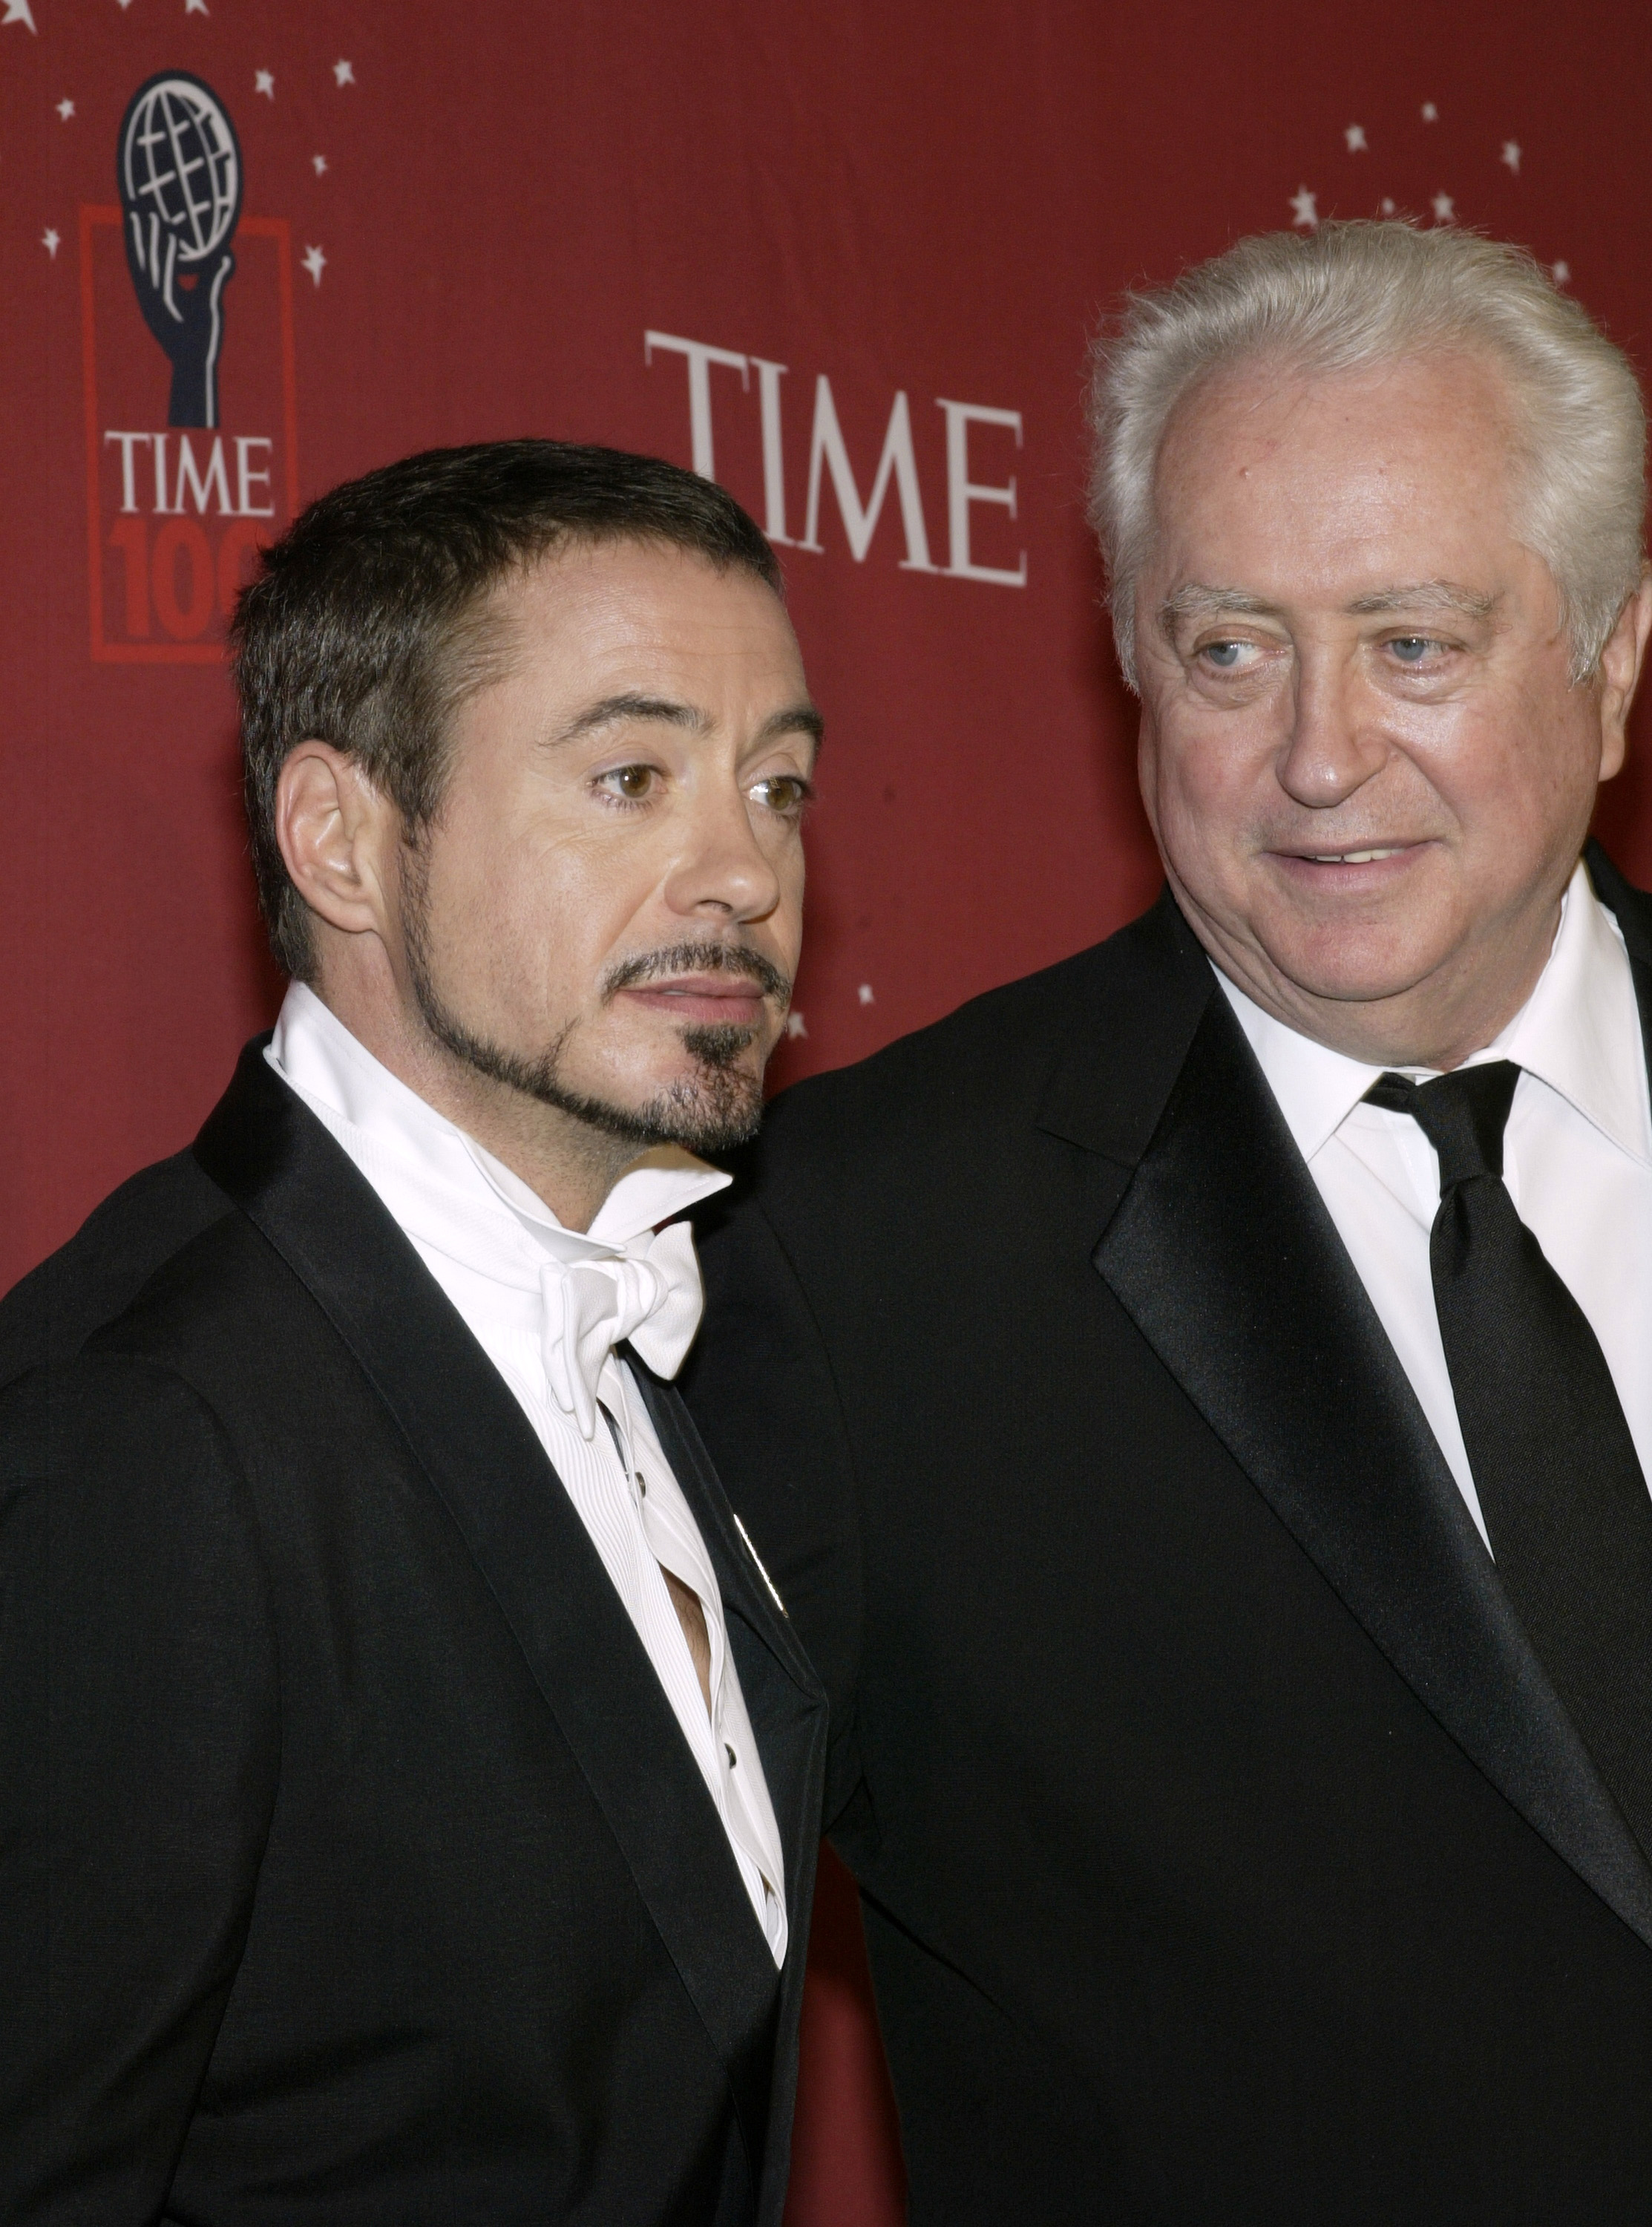 Robert Downey Jr. and Robert Downey Sr. in New York City, on May 8, 2008. | Source: Getty Images